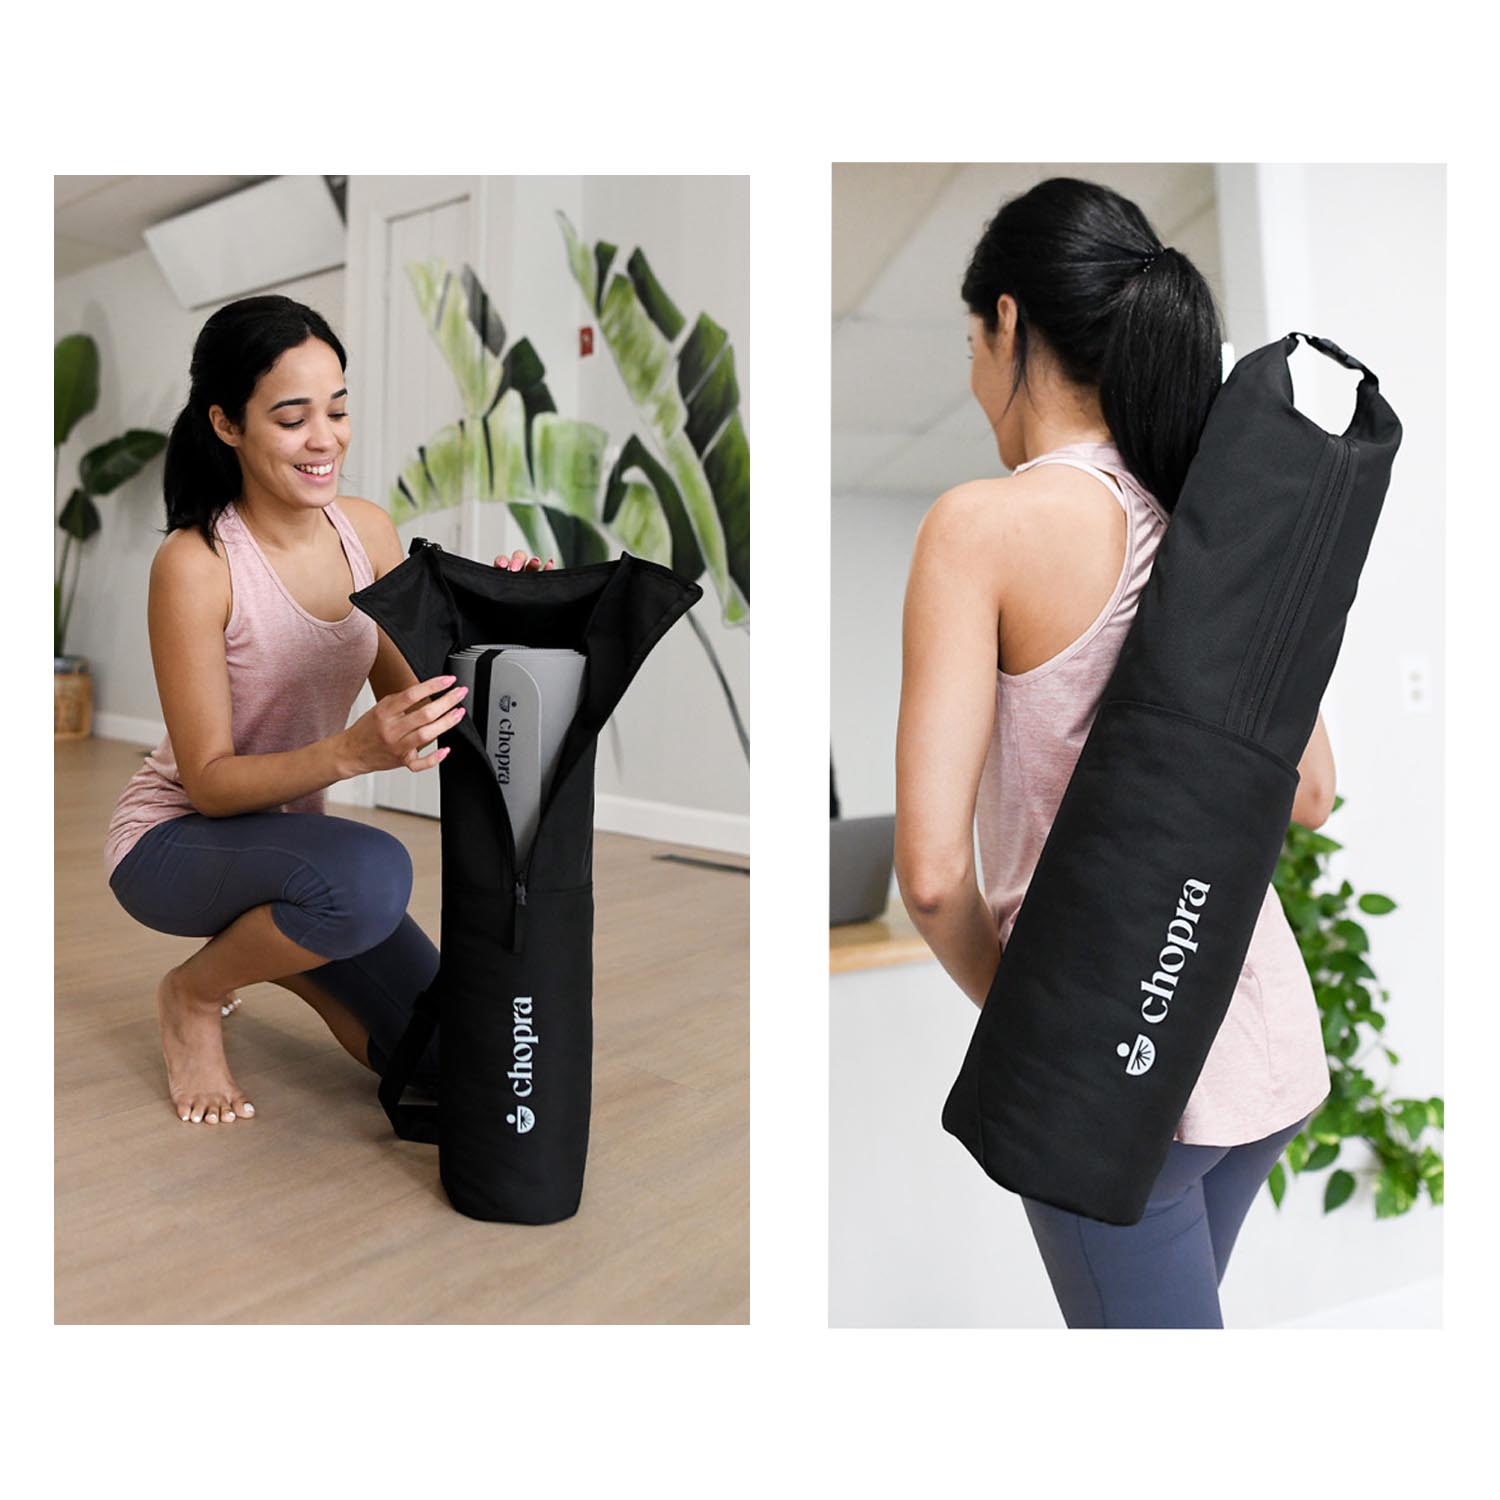 female yoga enthusiast shown checking and carrying a yoga bag and mat set 